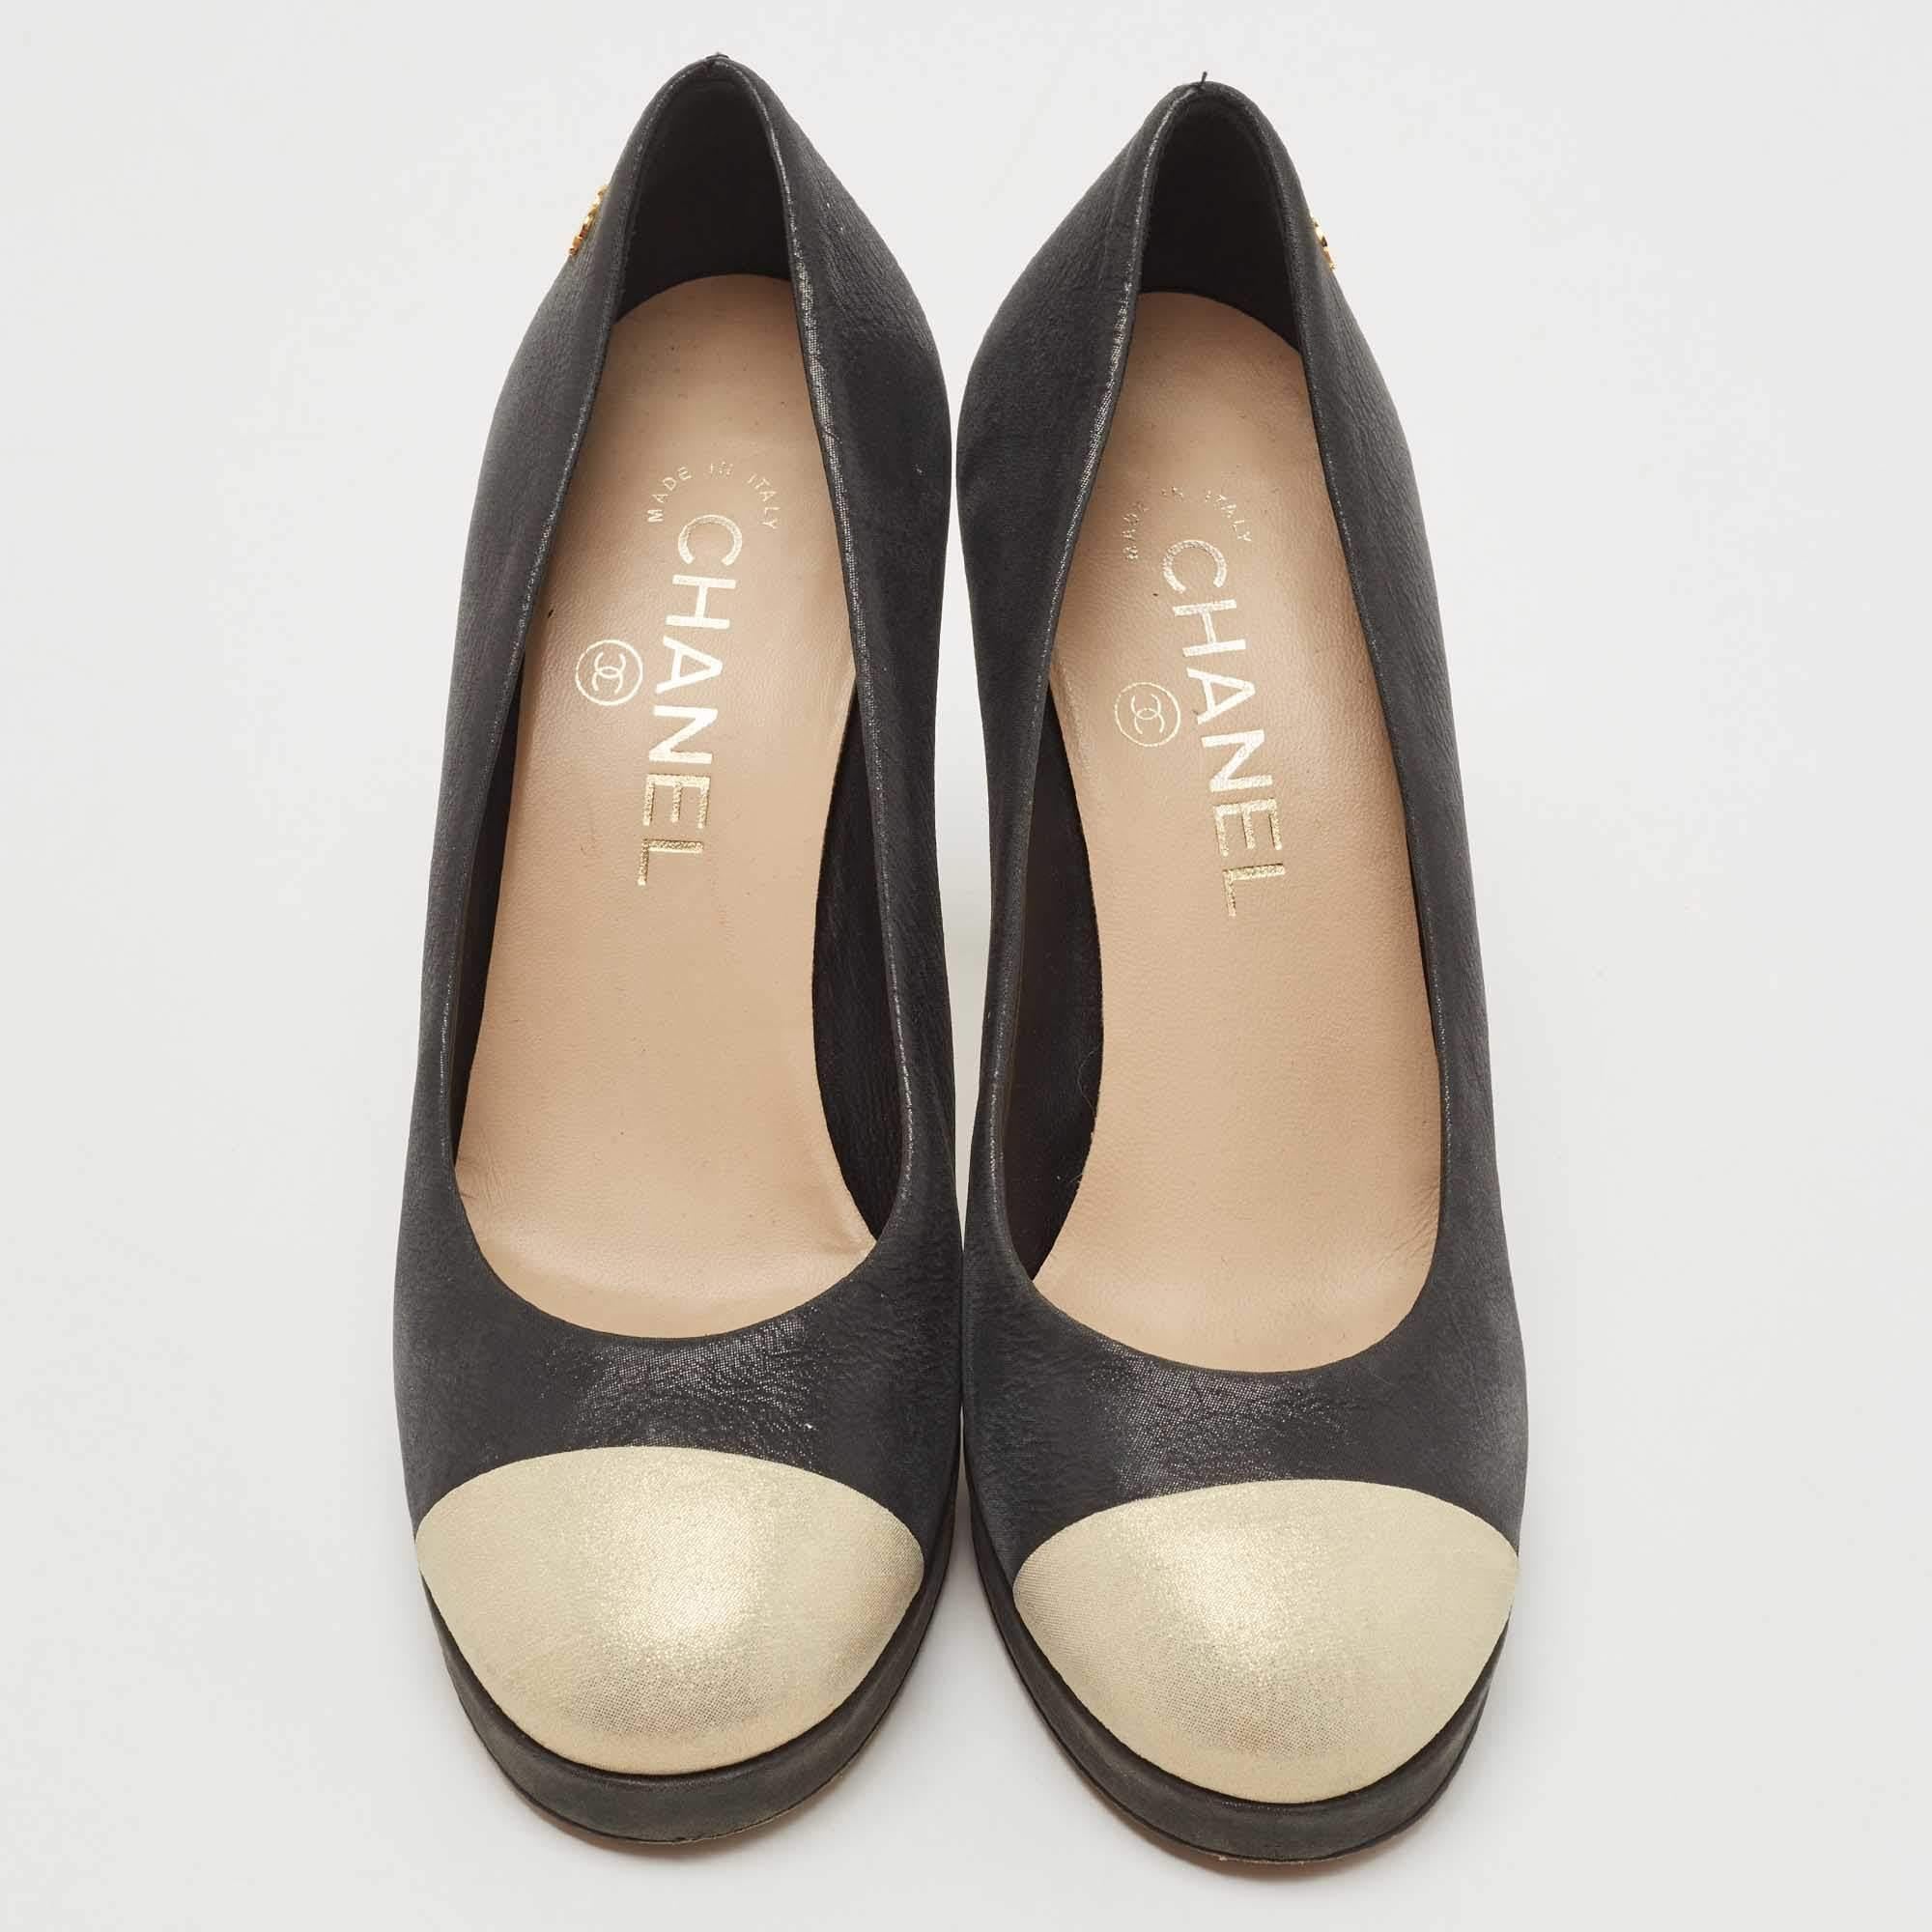 Cut into a timeless silhouette, this pair of Chanel pumps is simple yet classy. With a classy shade, it flaunts durable soles and comfortable footbeds.

Includes: Original Dustbag
